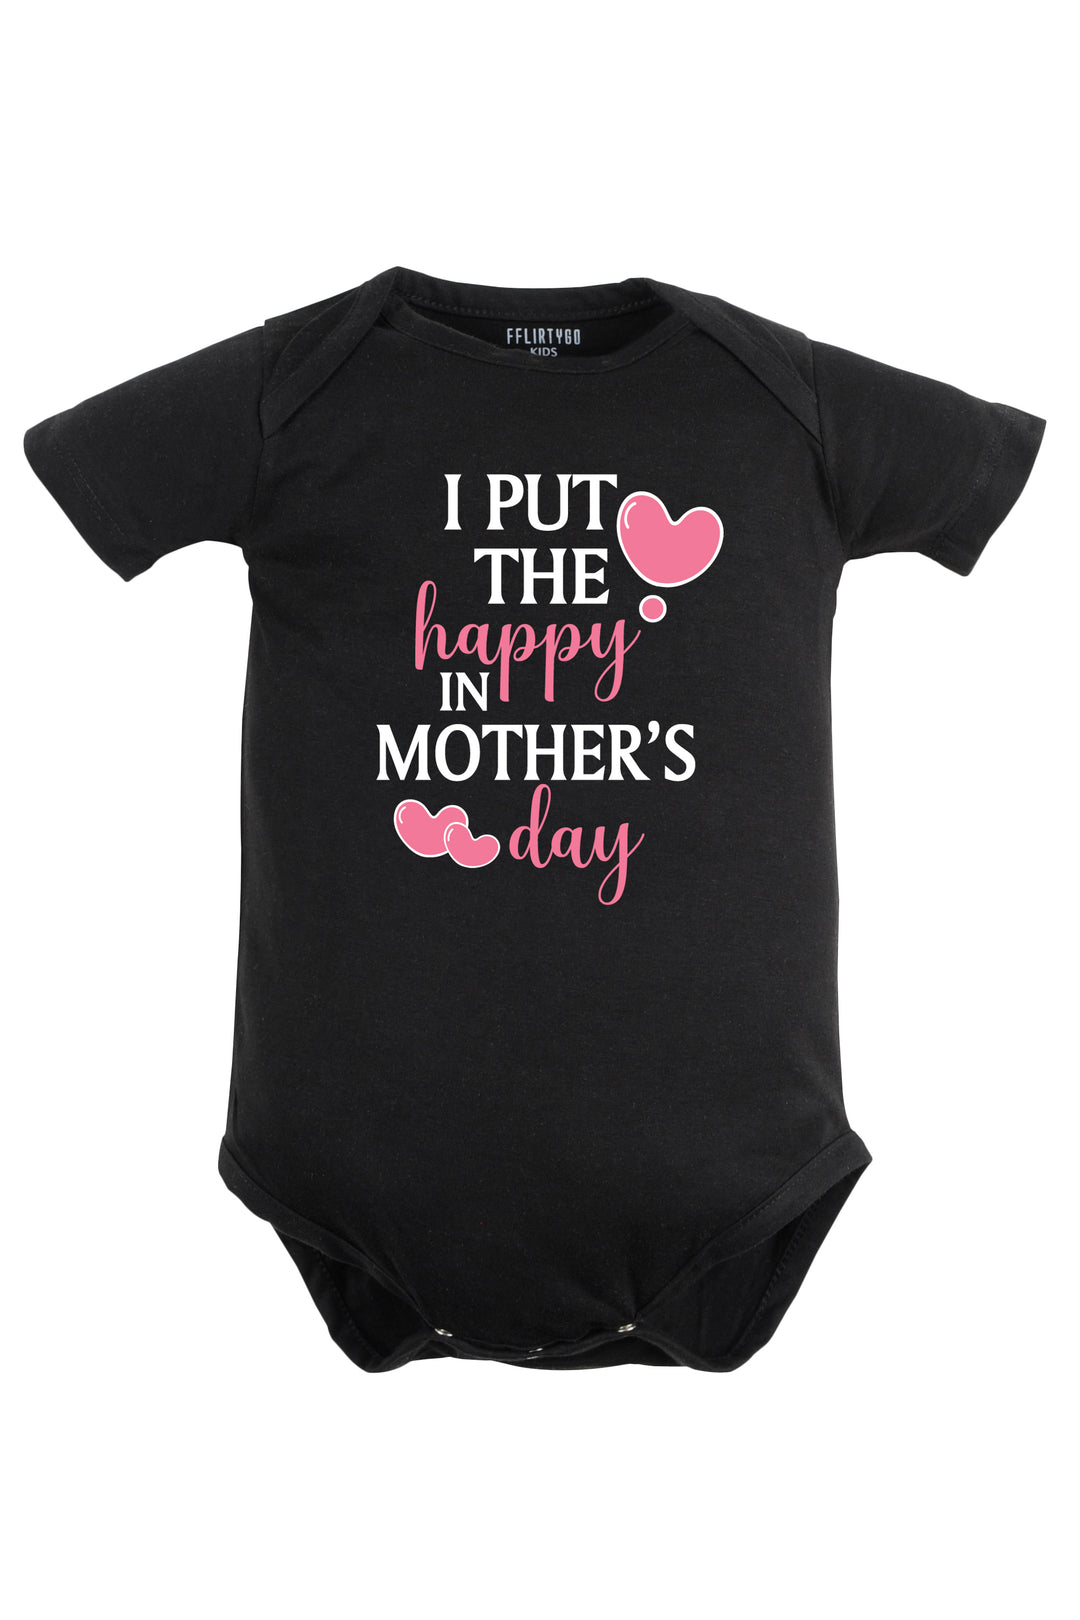 I Put The Happy In Mother's Day Baby Romper | Onesies